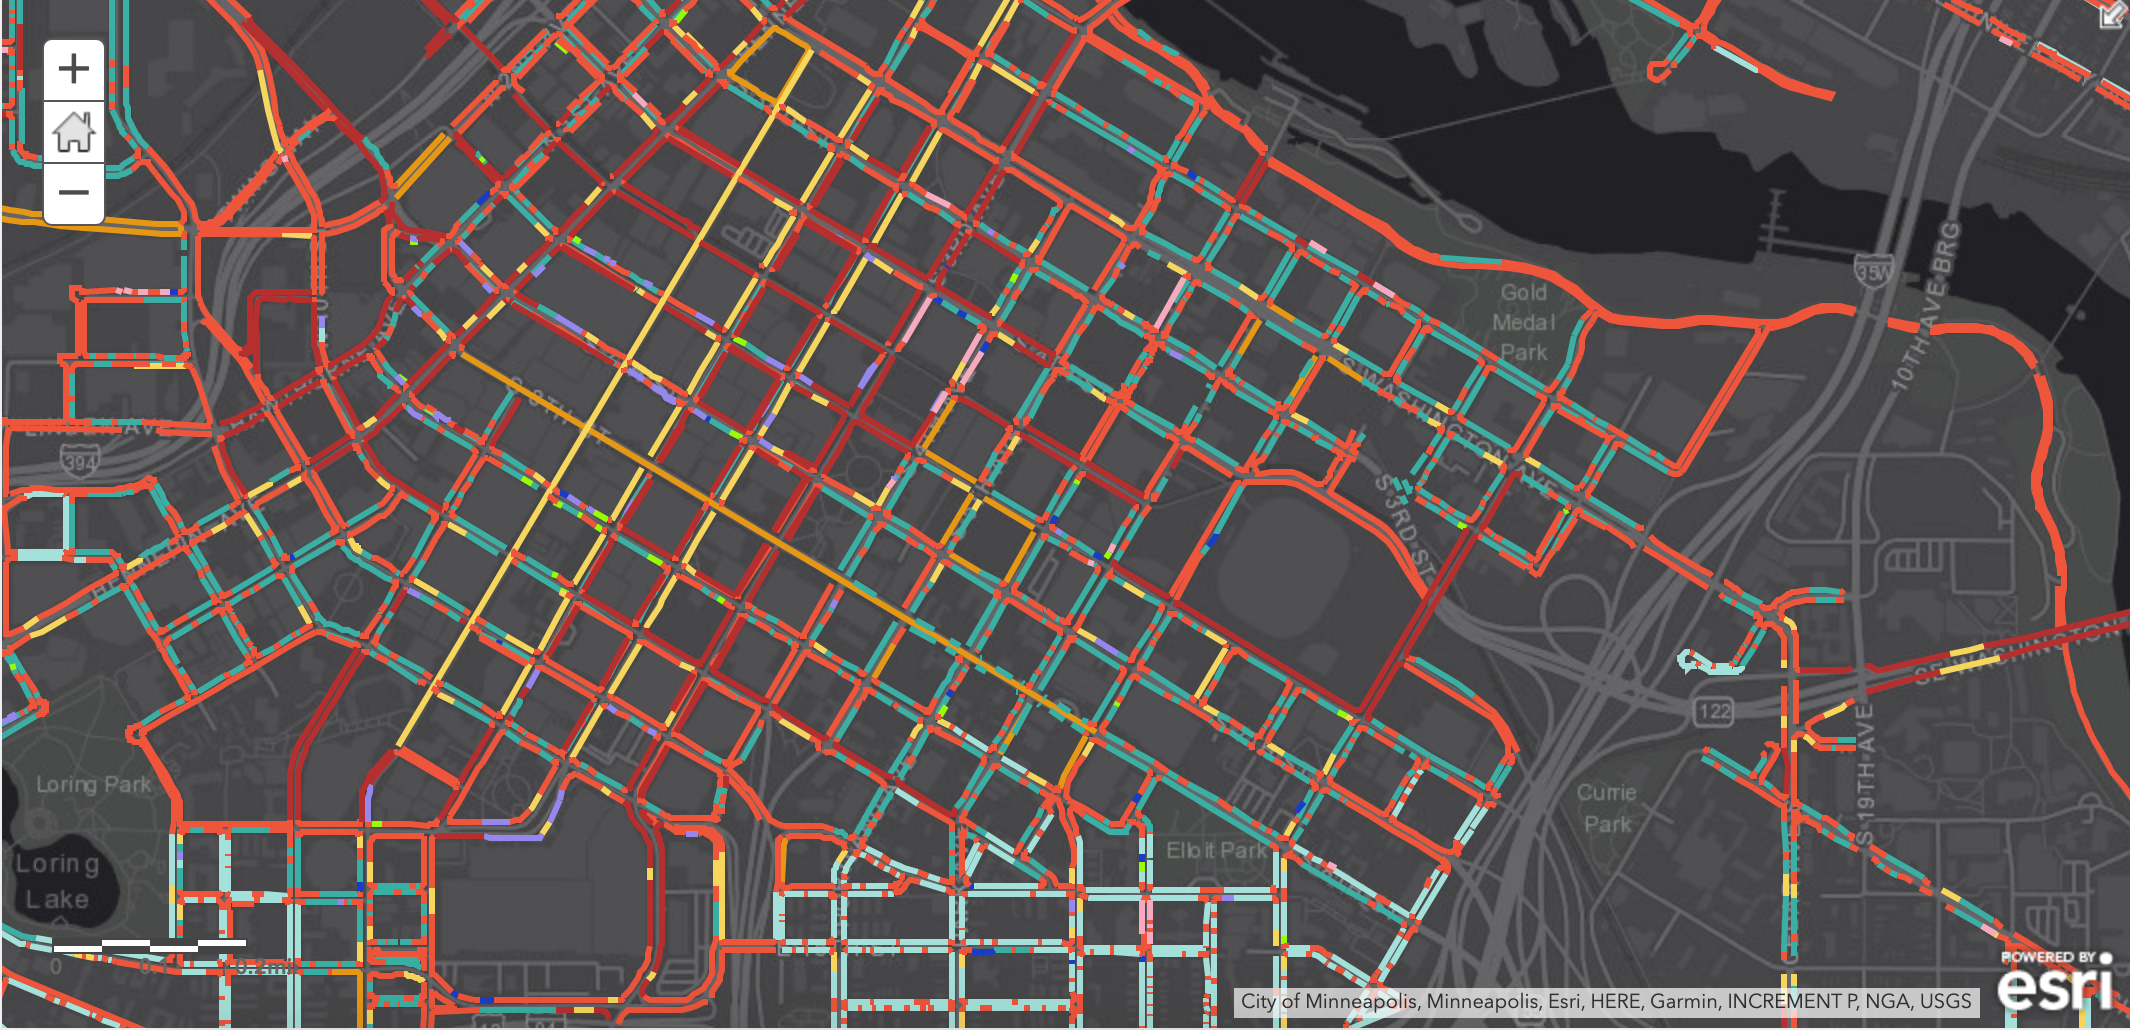 Digital mapping of the curb